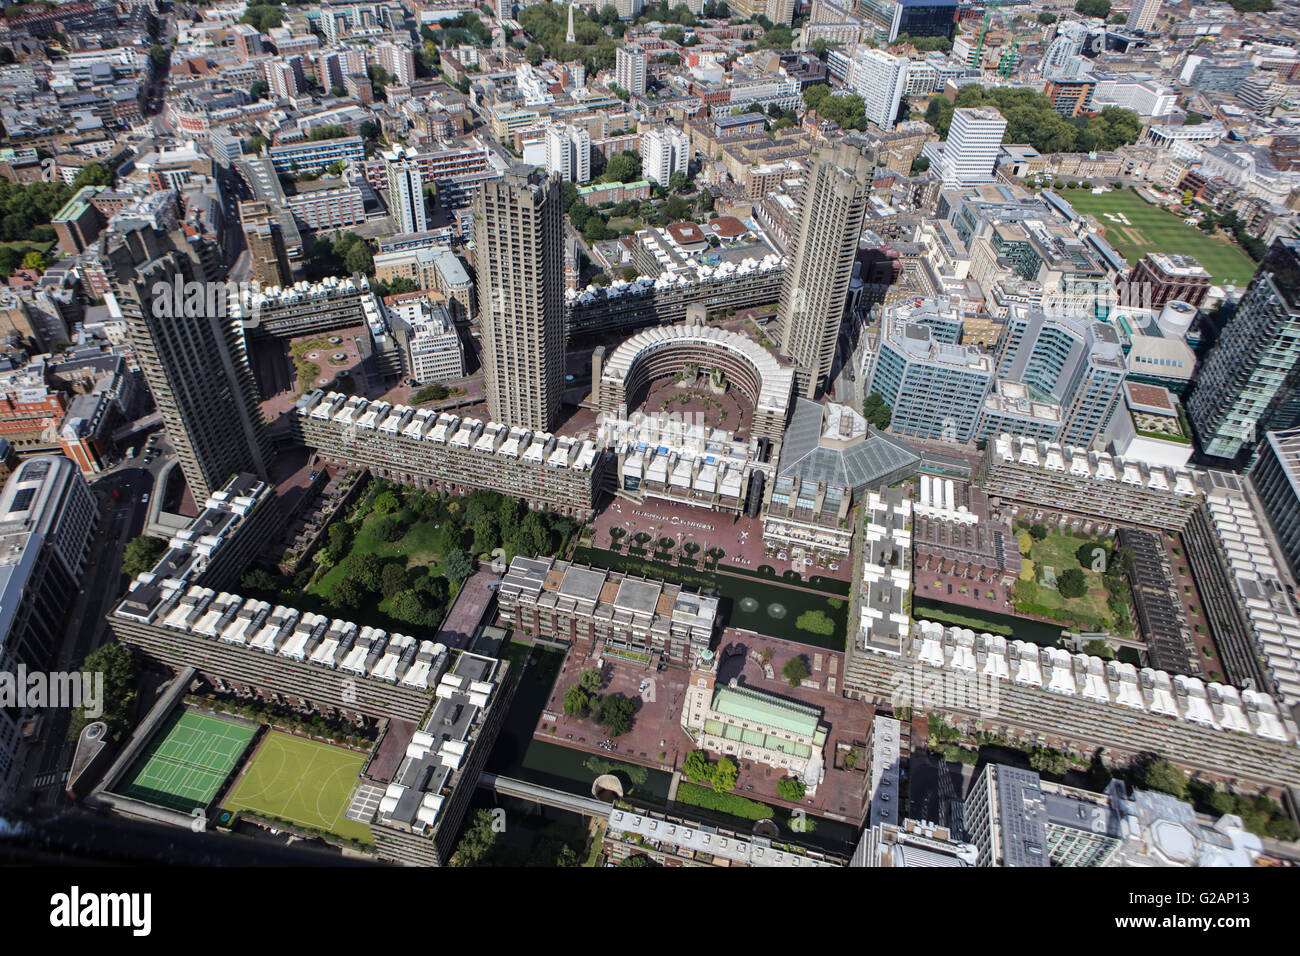 An aerial view of the Barbican Estate, a residential estate in the City of London and a prime example of Brutalist design Stock Photo